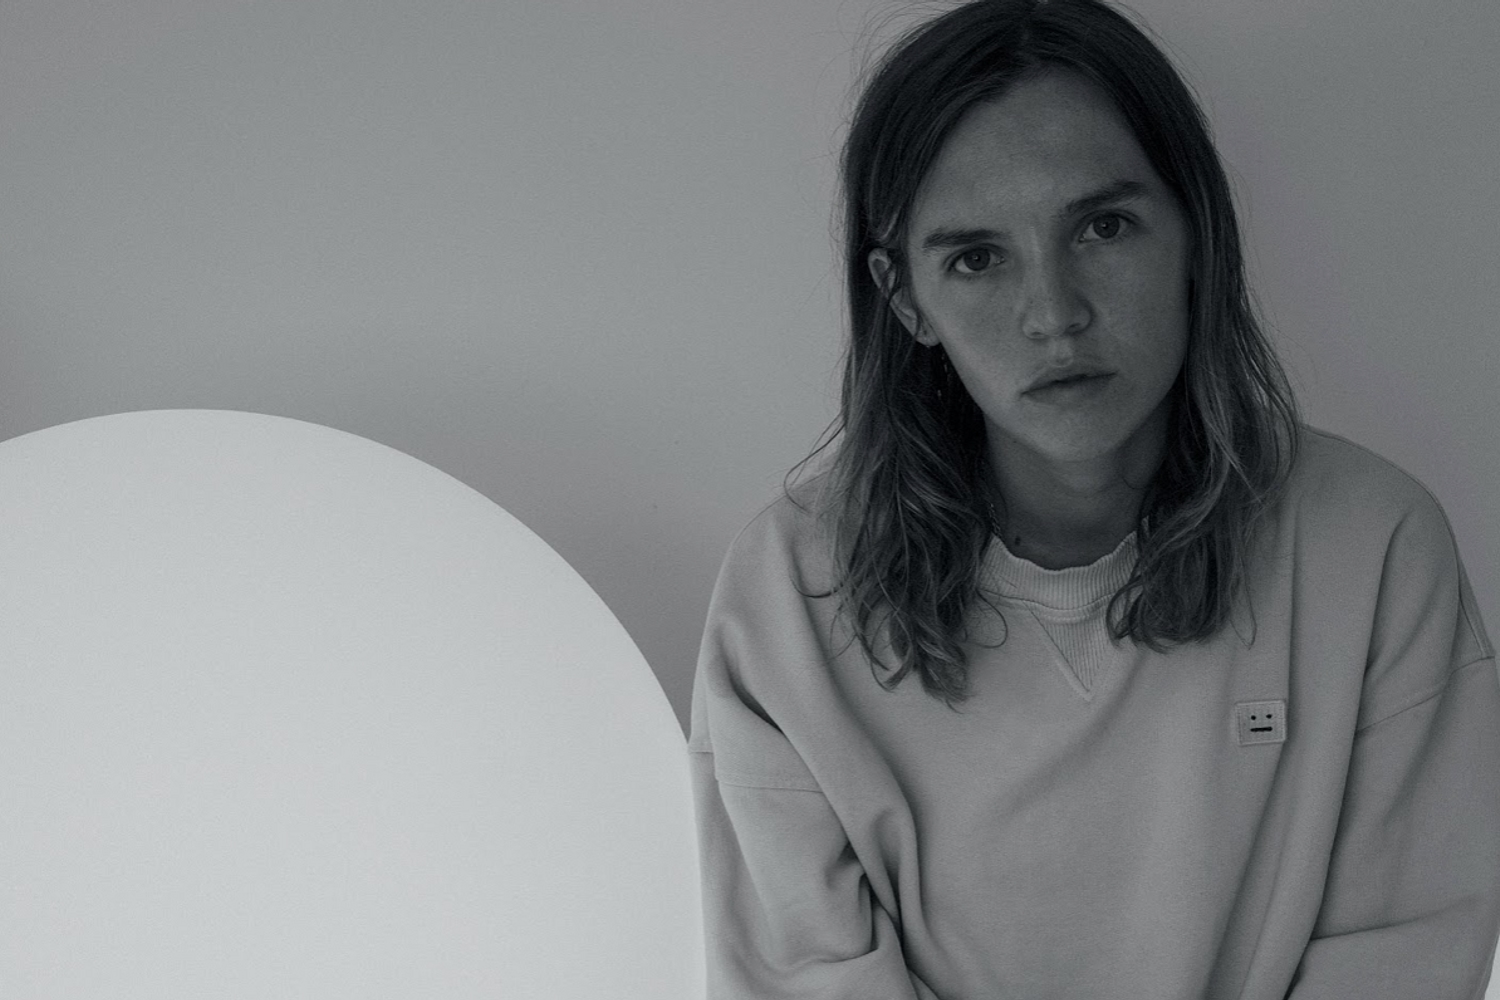 The Japanese House unveils ‘Chewing Cotton Wool’ EP